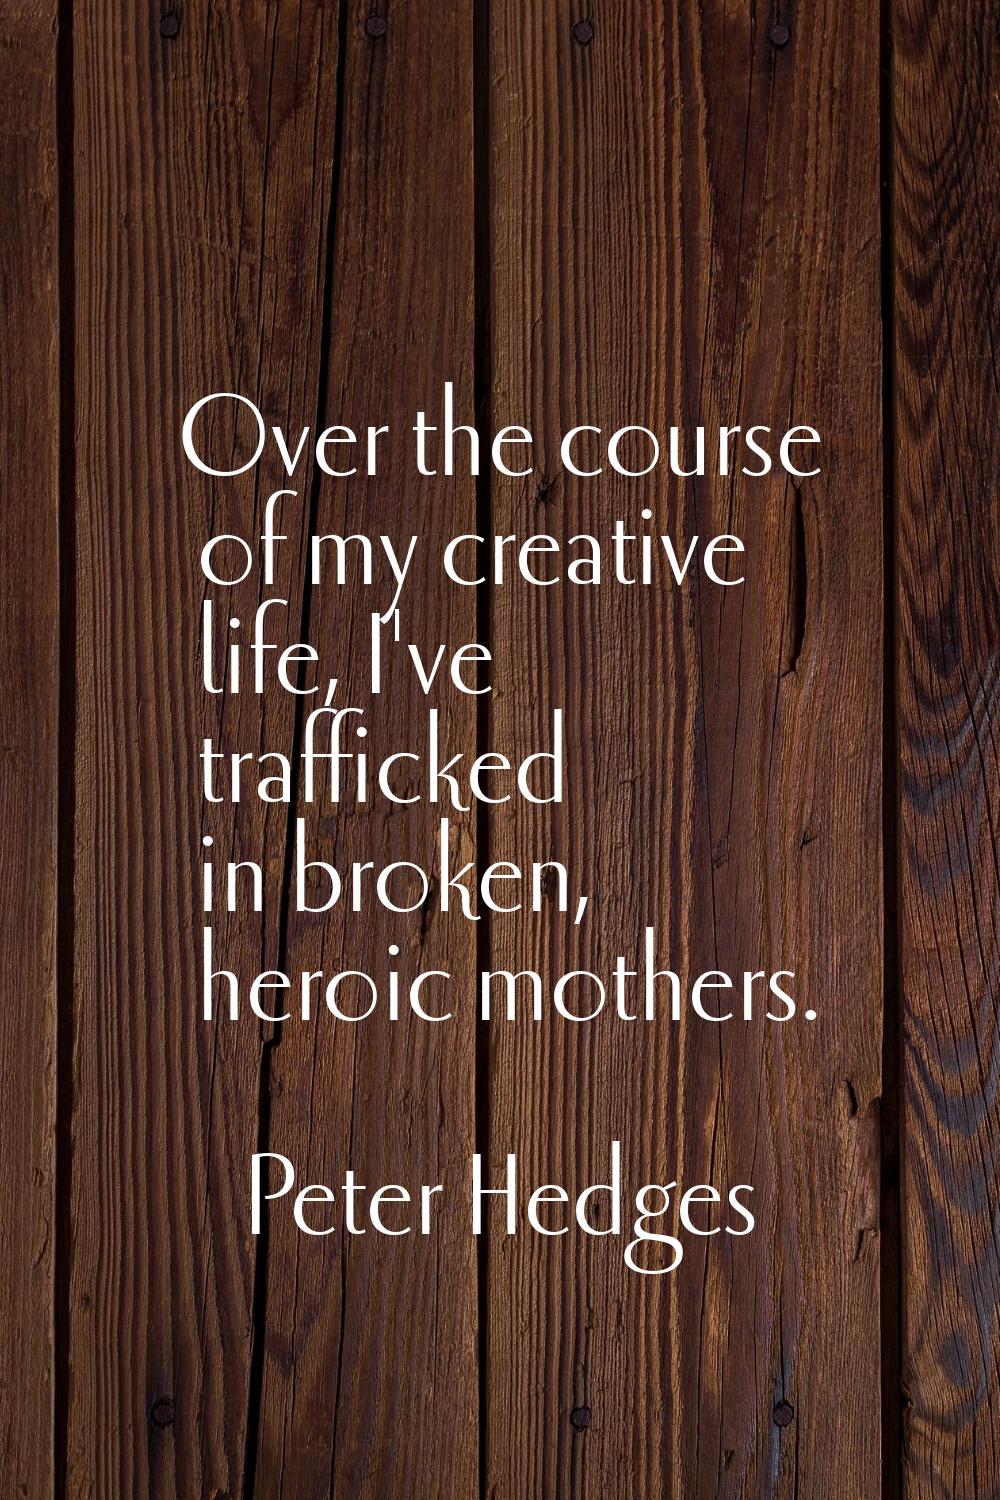 Over the course of my creative life, I've trafficked in broken, heroic mothers.